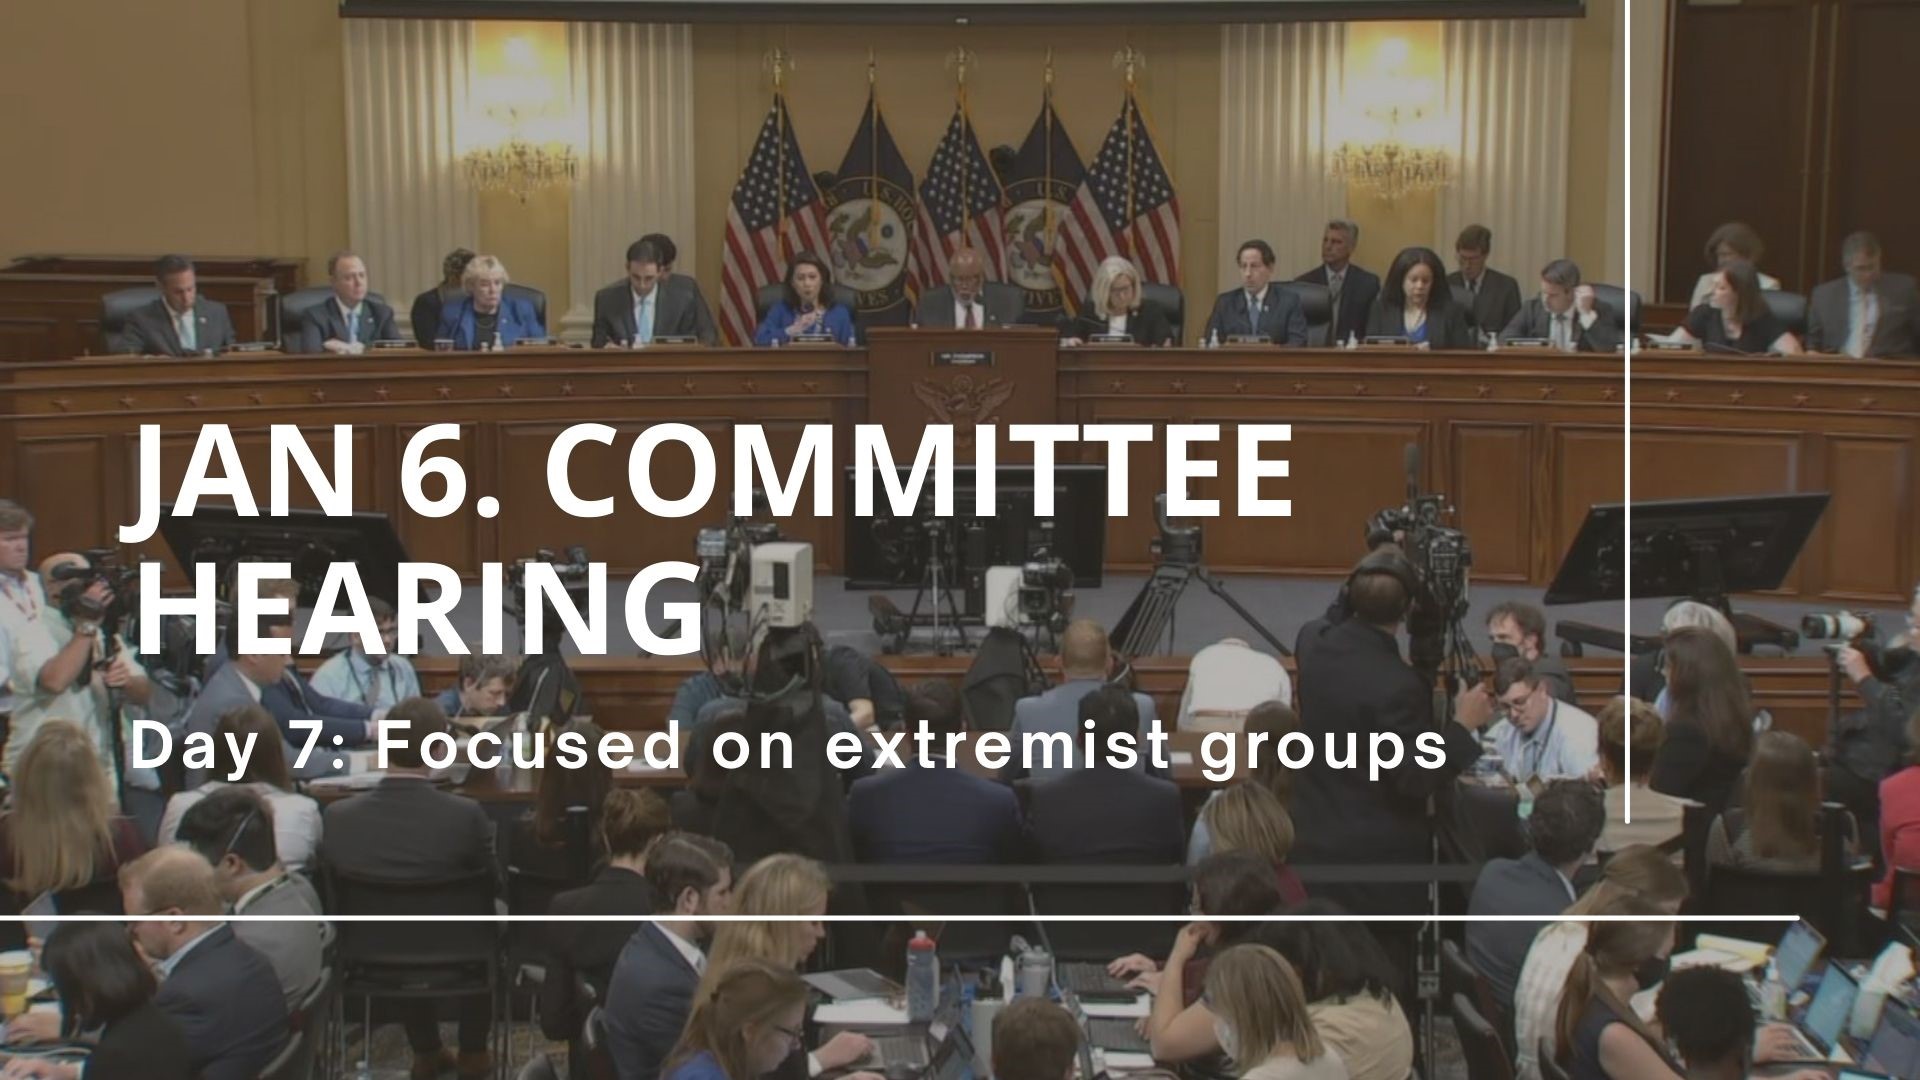 The second half of the Jan. 6 hearing on July 12, 2022. Day 7 focused on extremist groups like the Oathkeepers and Proud Boys.